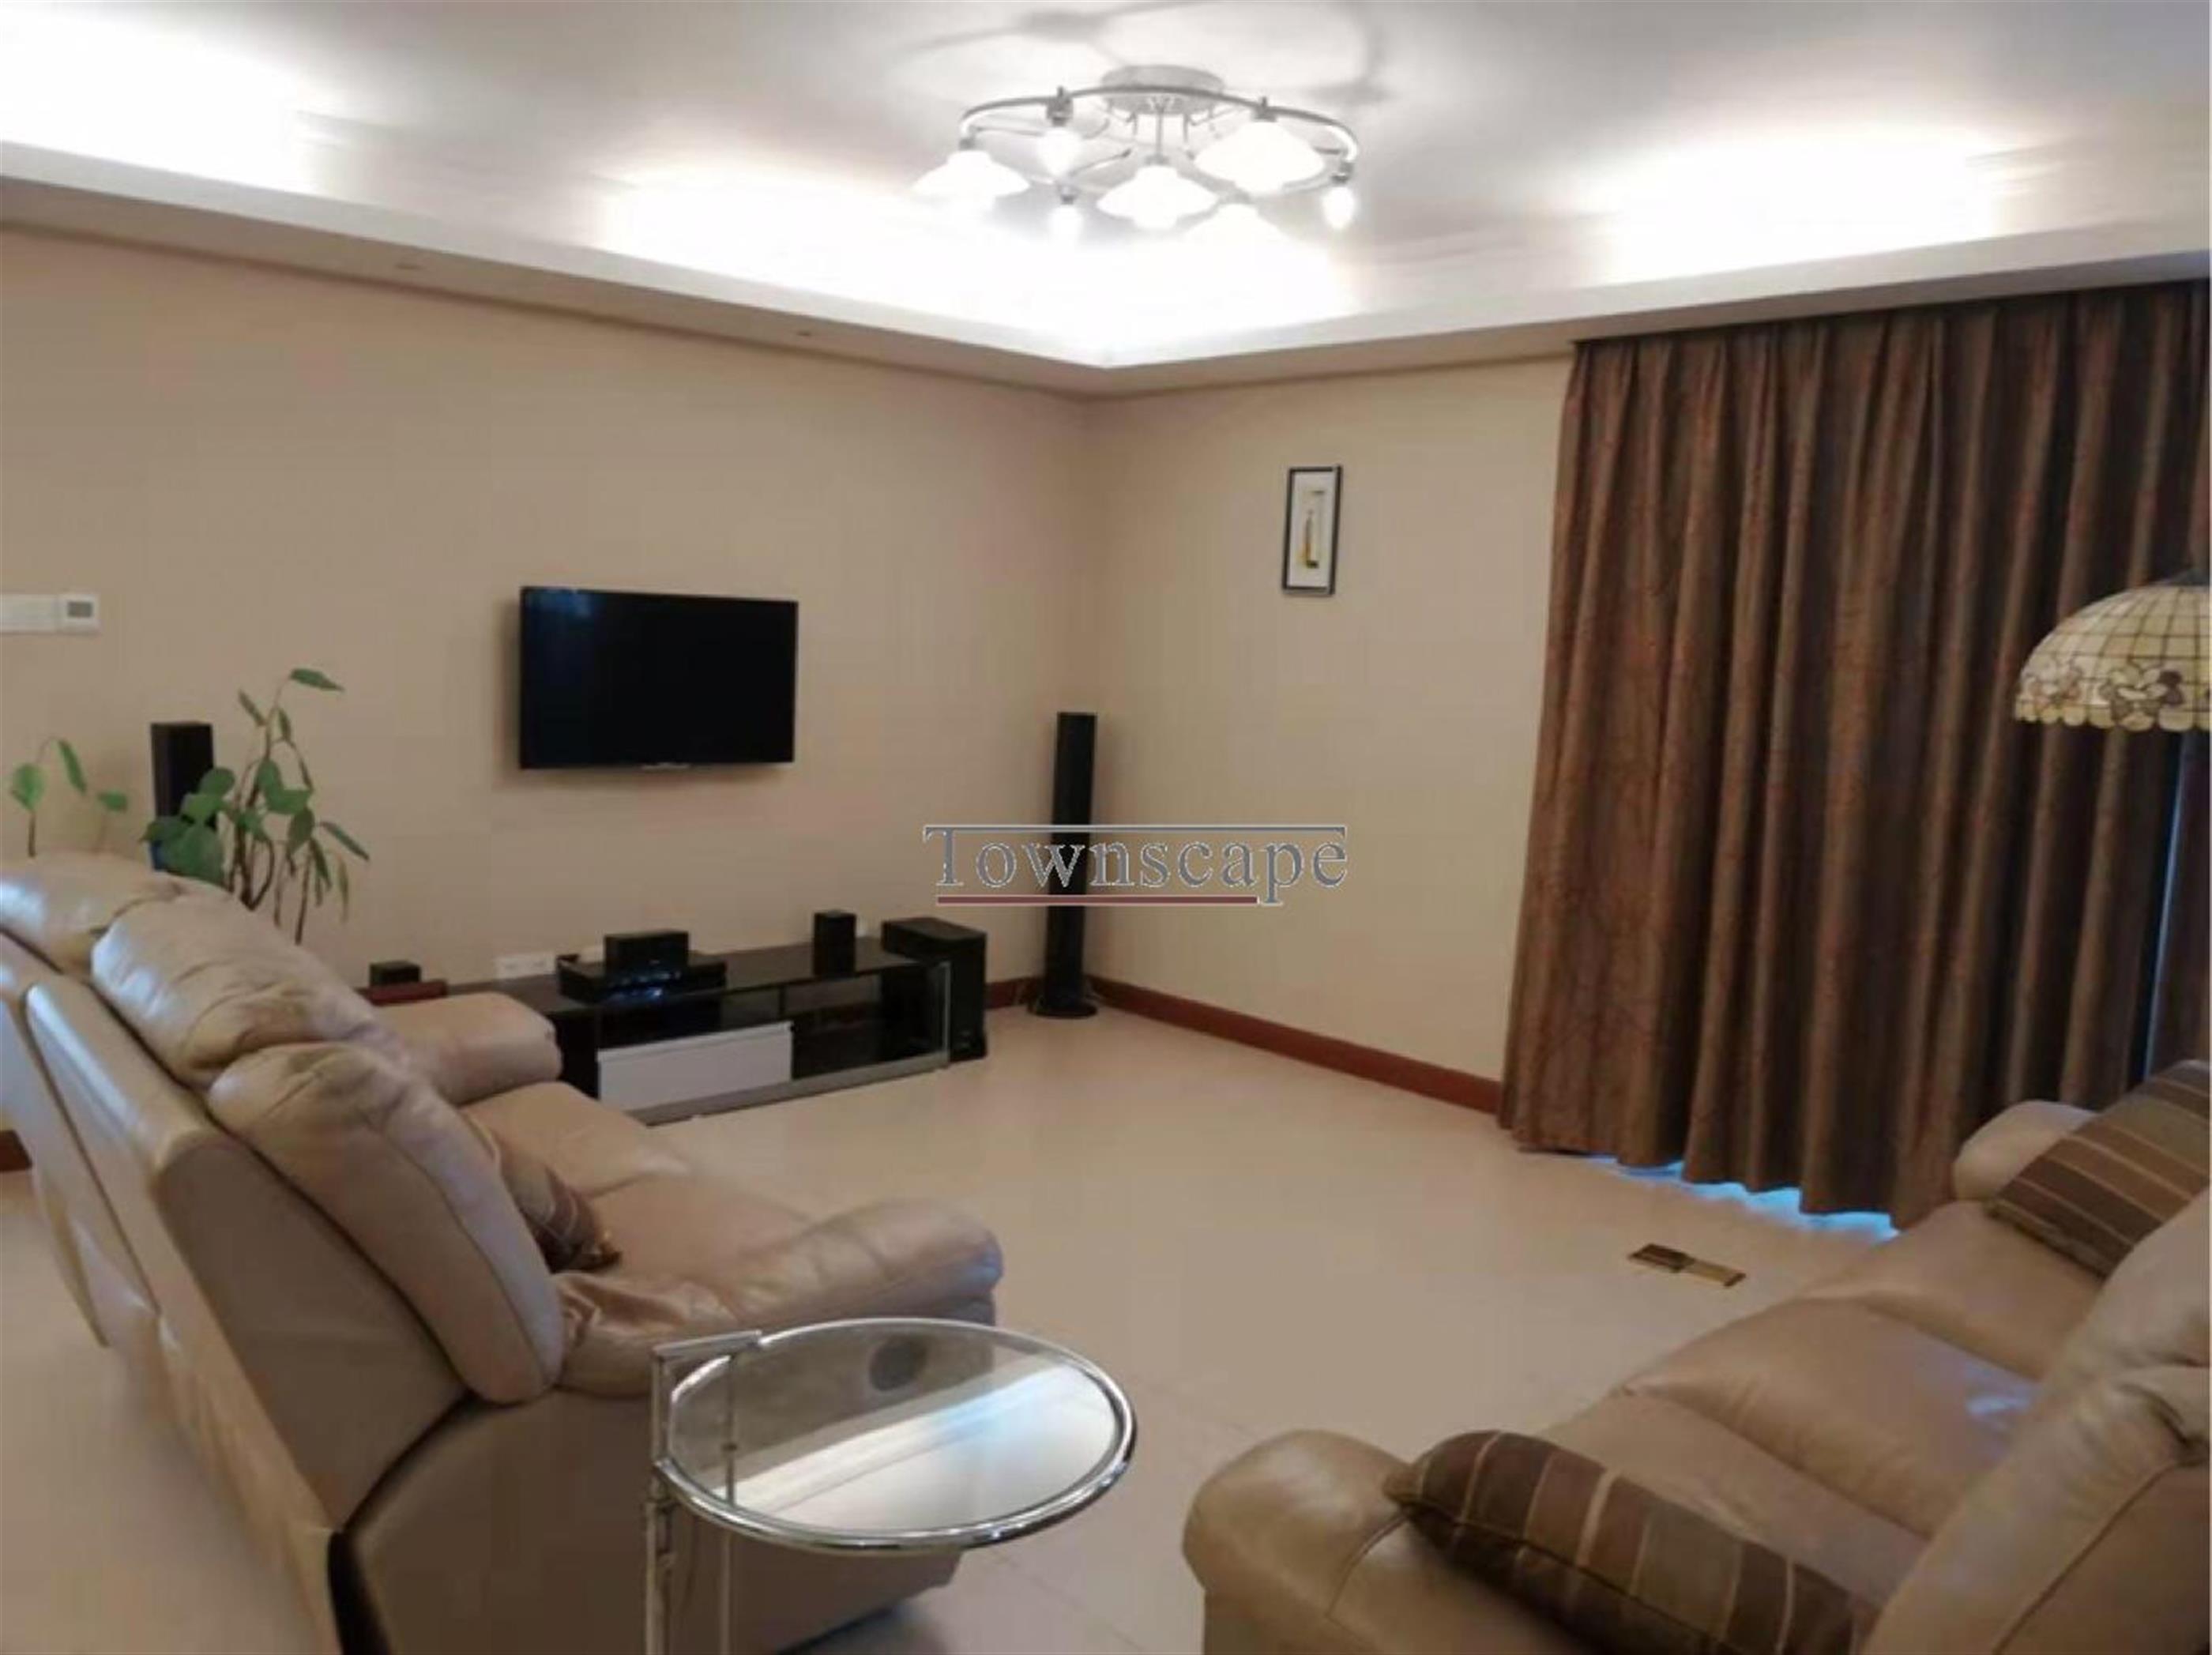 comfy sofas Great Value Spacious Bright 3BR Apartment Near LN 10 & Zoo for Rent in Shanghai